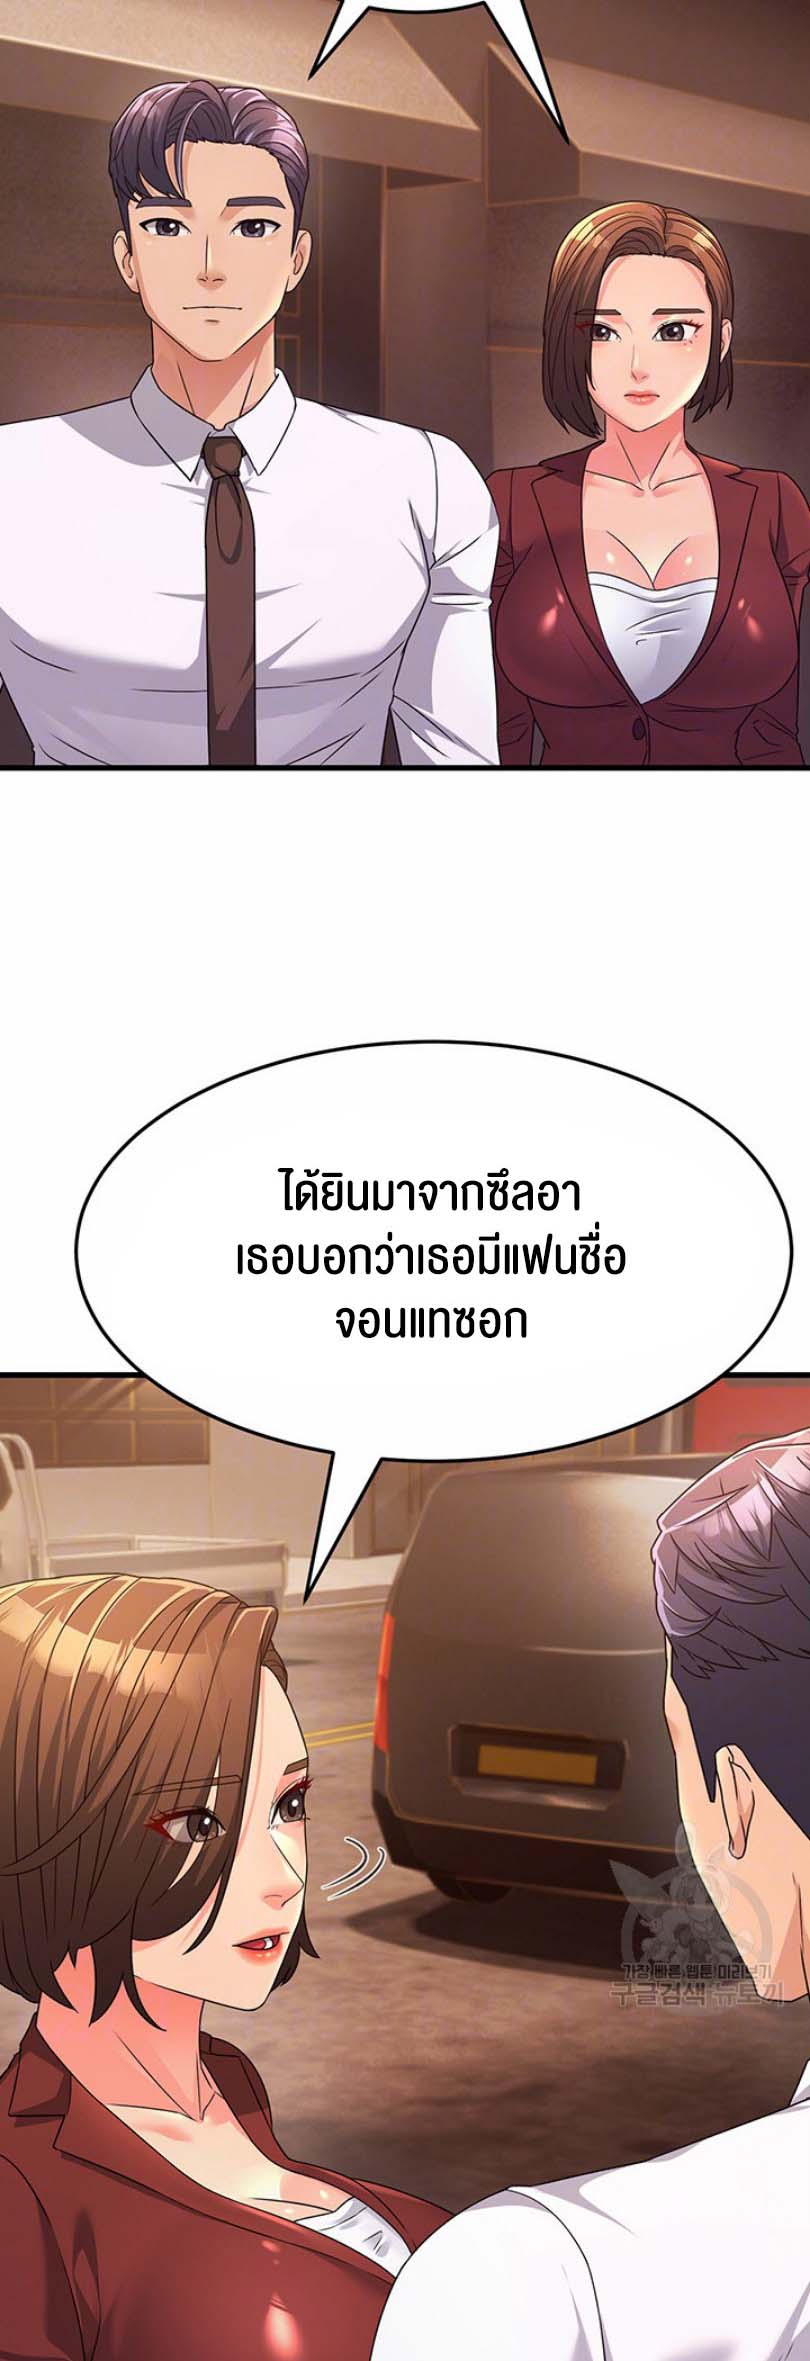 à¸­à¹ˆà¸²à¸™à¹‚à¸”à¸ˆà¸´à¸™ à¹€à¸£à¸·à¹ˆà¸­à¸‡ Mother in Law Bends To My Will 9 05